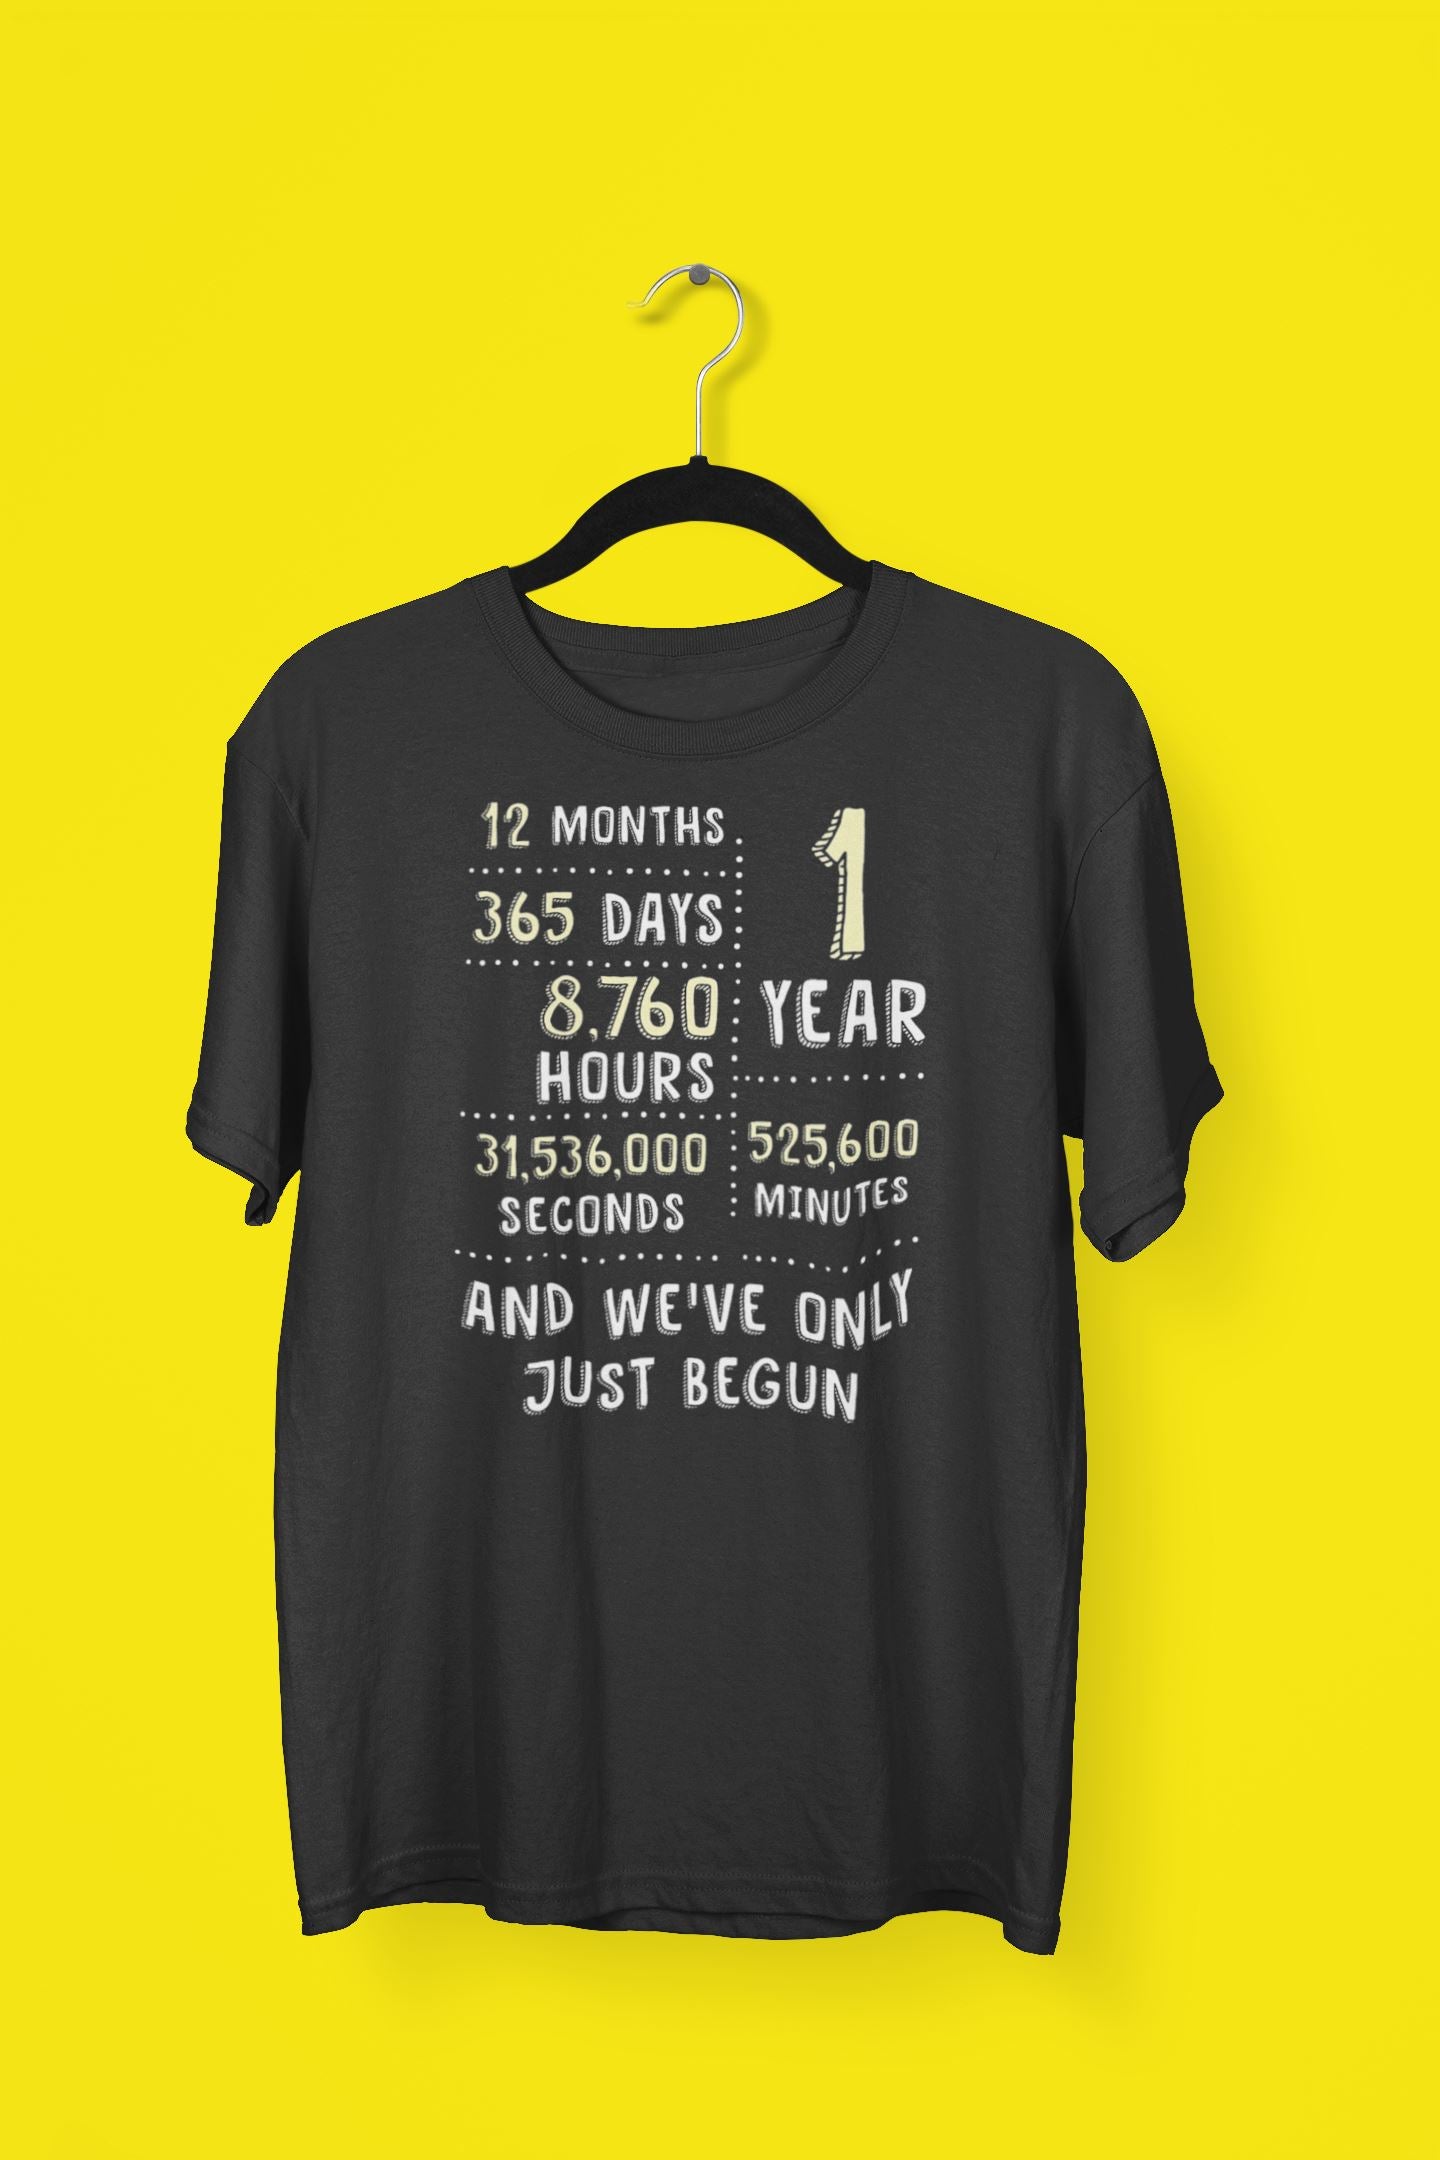 We've Only Just Begun 1st Anniversary Special Black T Shirt for Men and Women freeshipping - Catch My Drift India